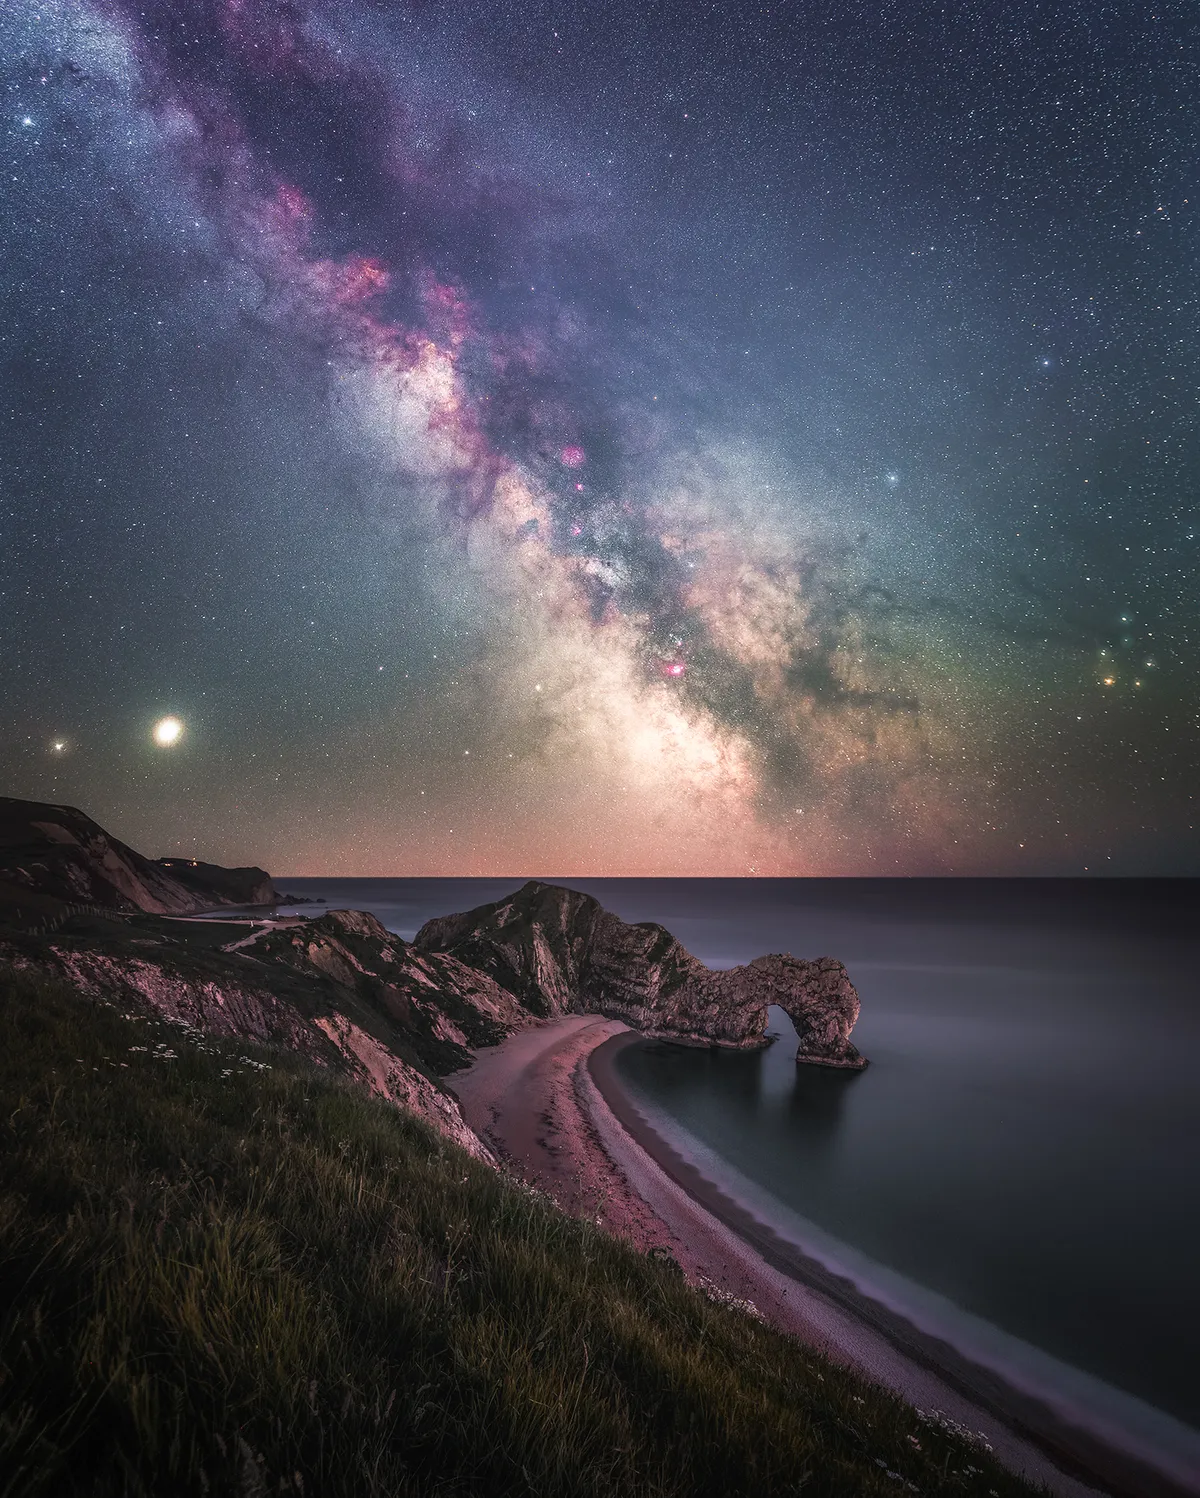 Milky Way rising over Durdle Door © Anthony Sullivan (UK) West Lulworth, Dorset, UK, 20 May 2020. Equipment: Canon 6D camera. Foreground: 20 mm f/8 lens, ISO 100, 244-second exposure. Sky: 20 mm f/4 lens, ISO 1600, 4 x 240-second exposures